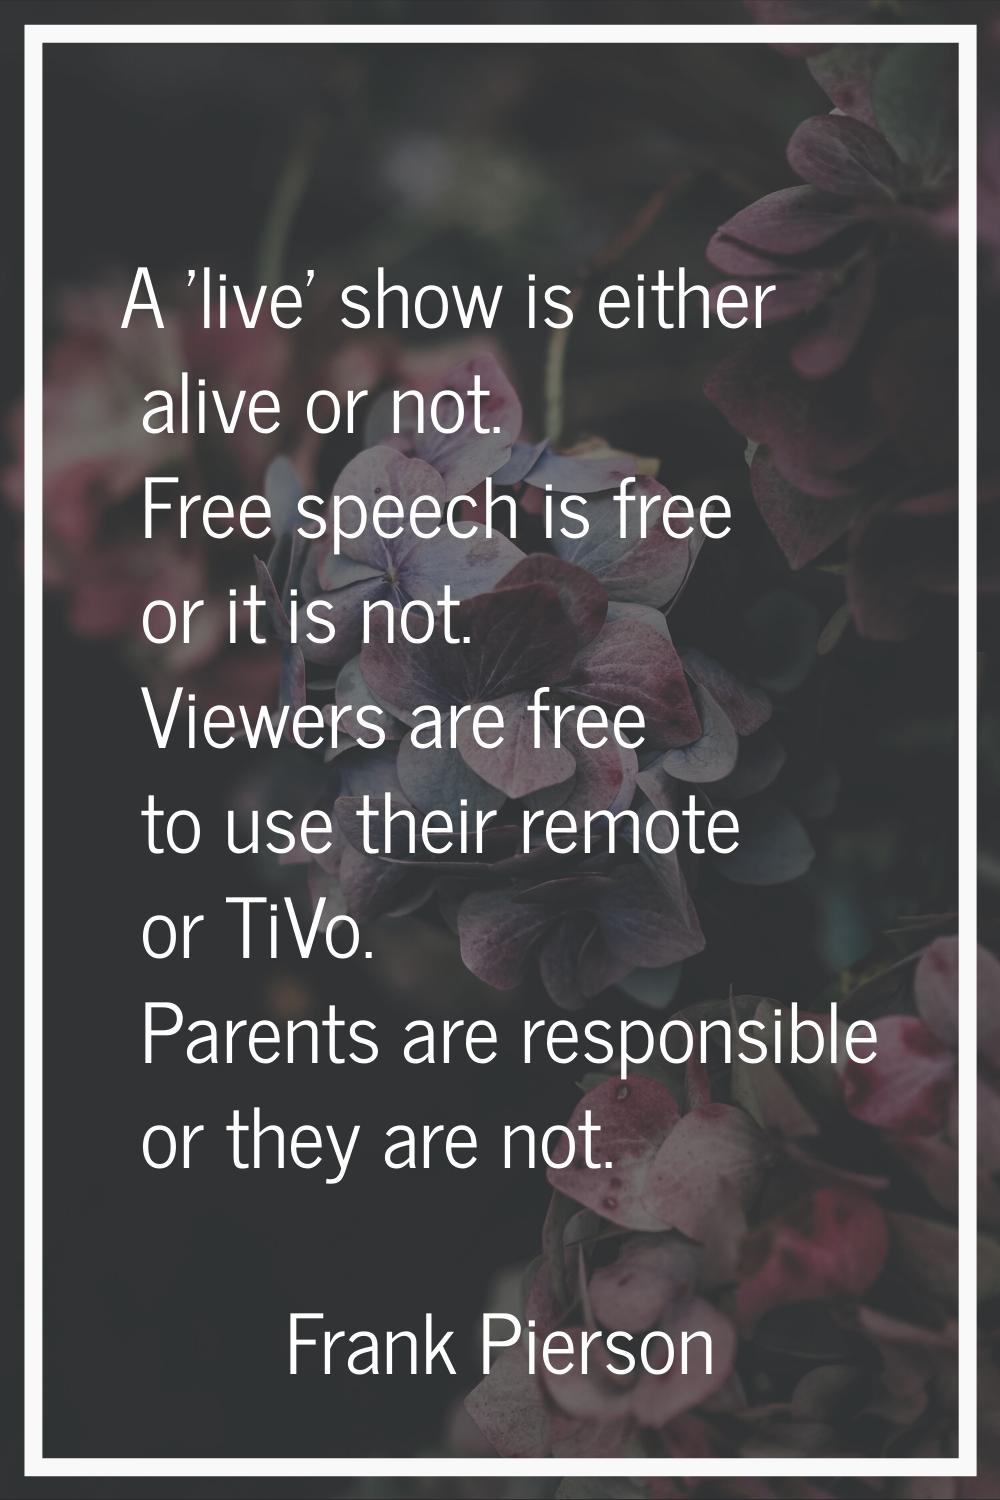 A 'live' show is either alive or not. Free speech is free or it is not. Viewers are free to use the